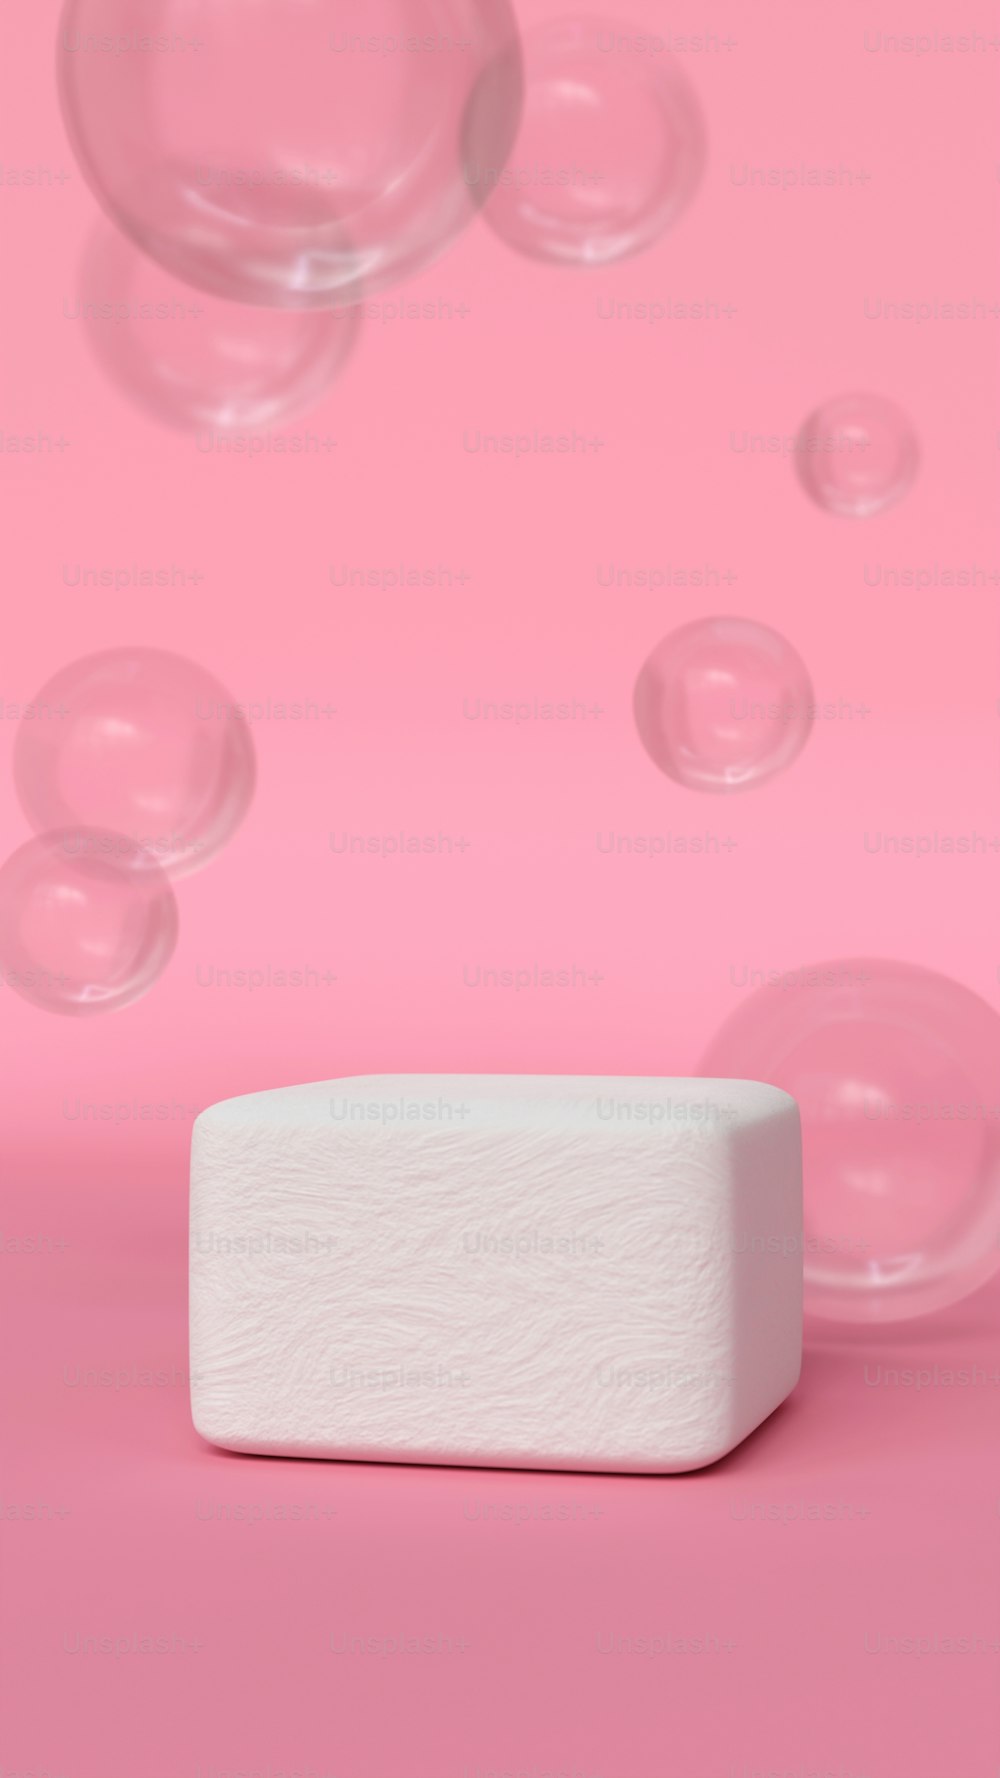 a soap bar sitting on top of a pink surface